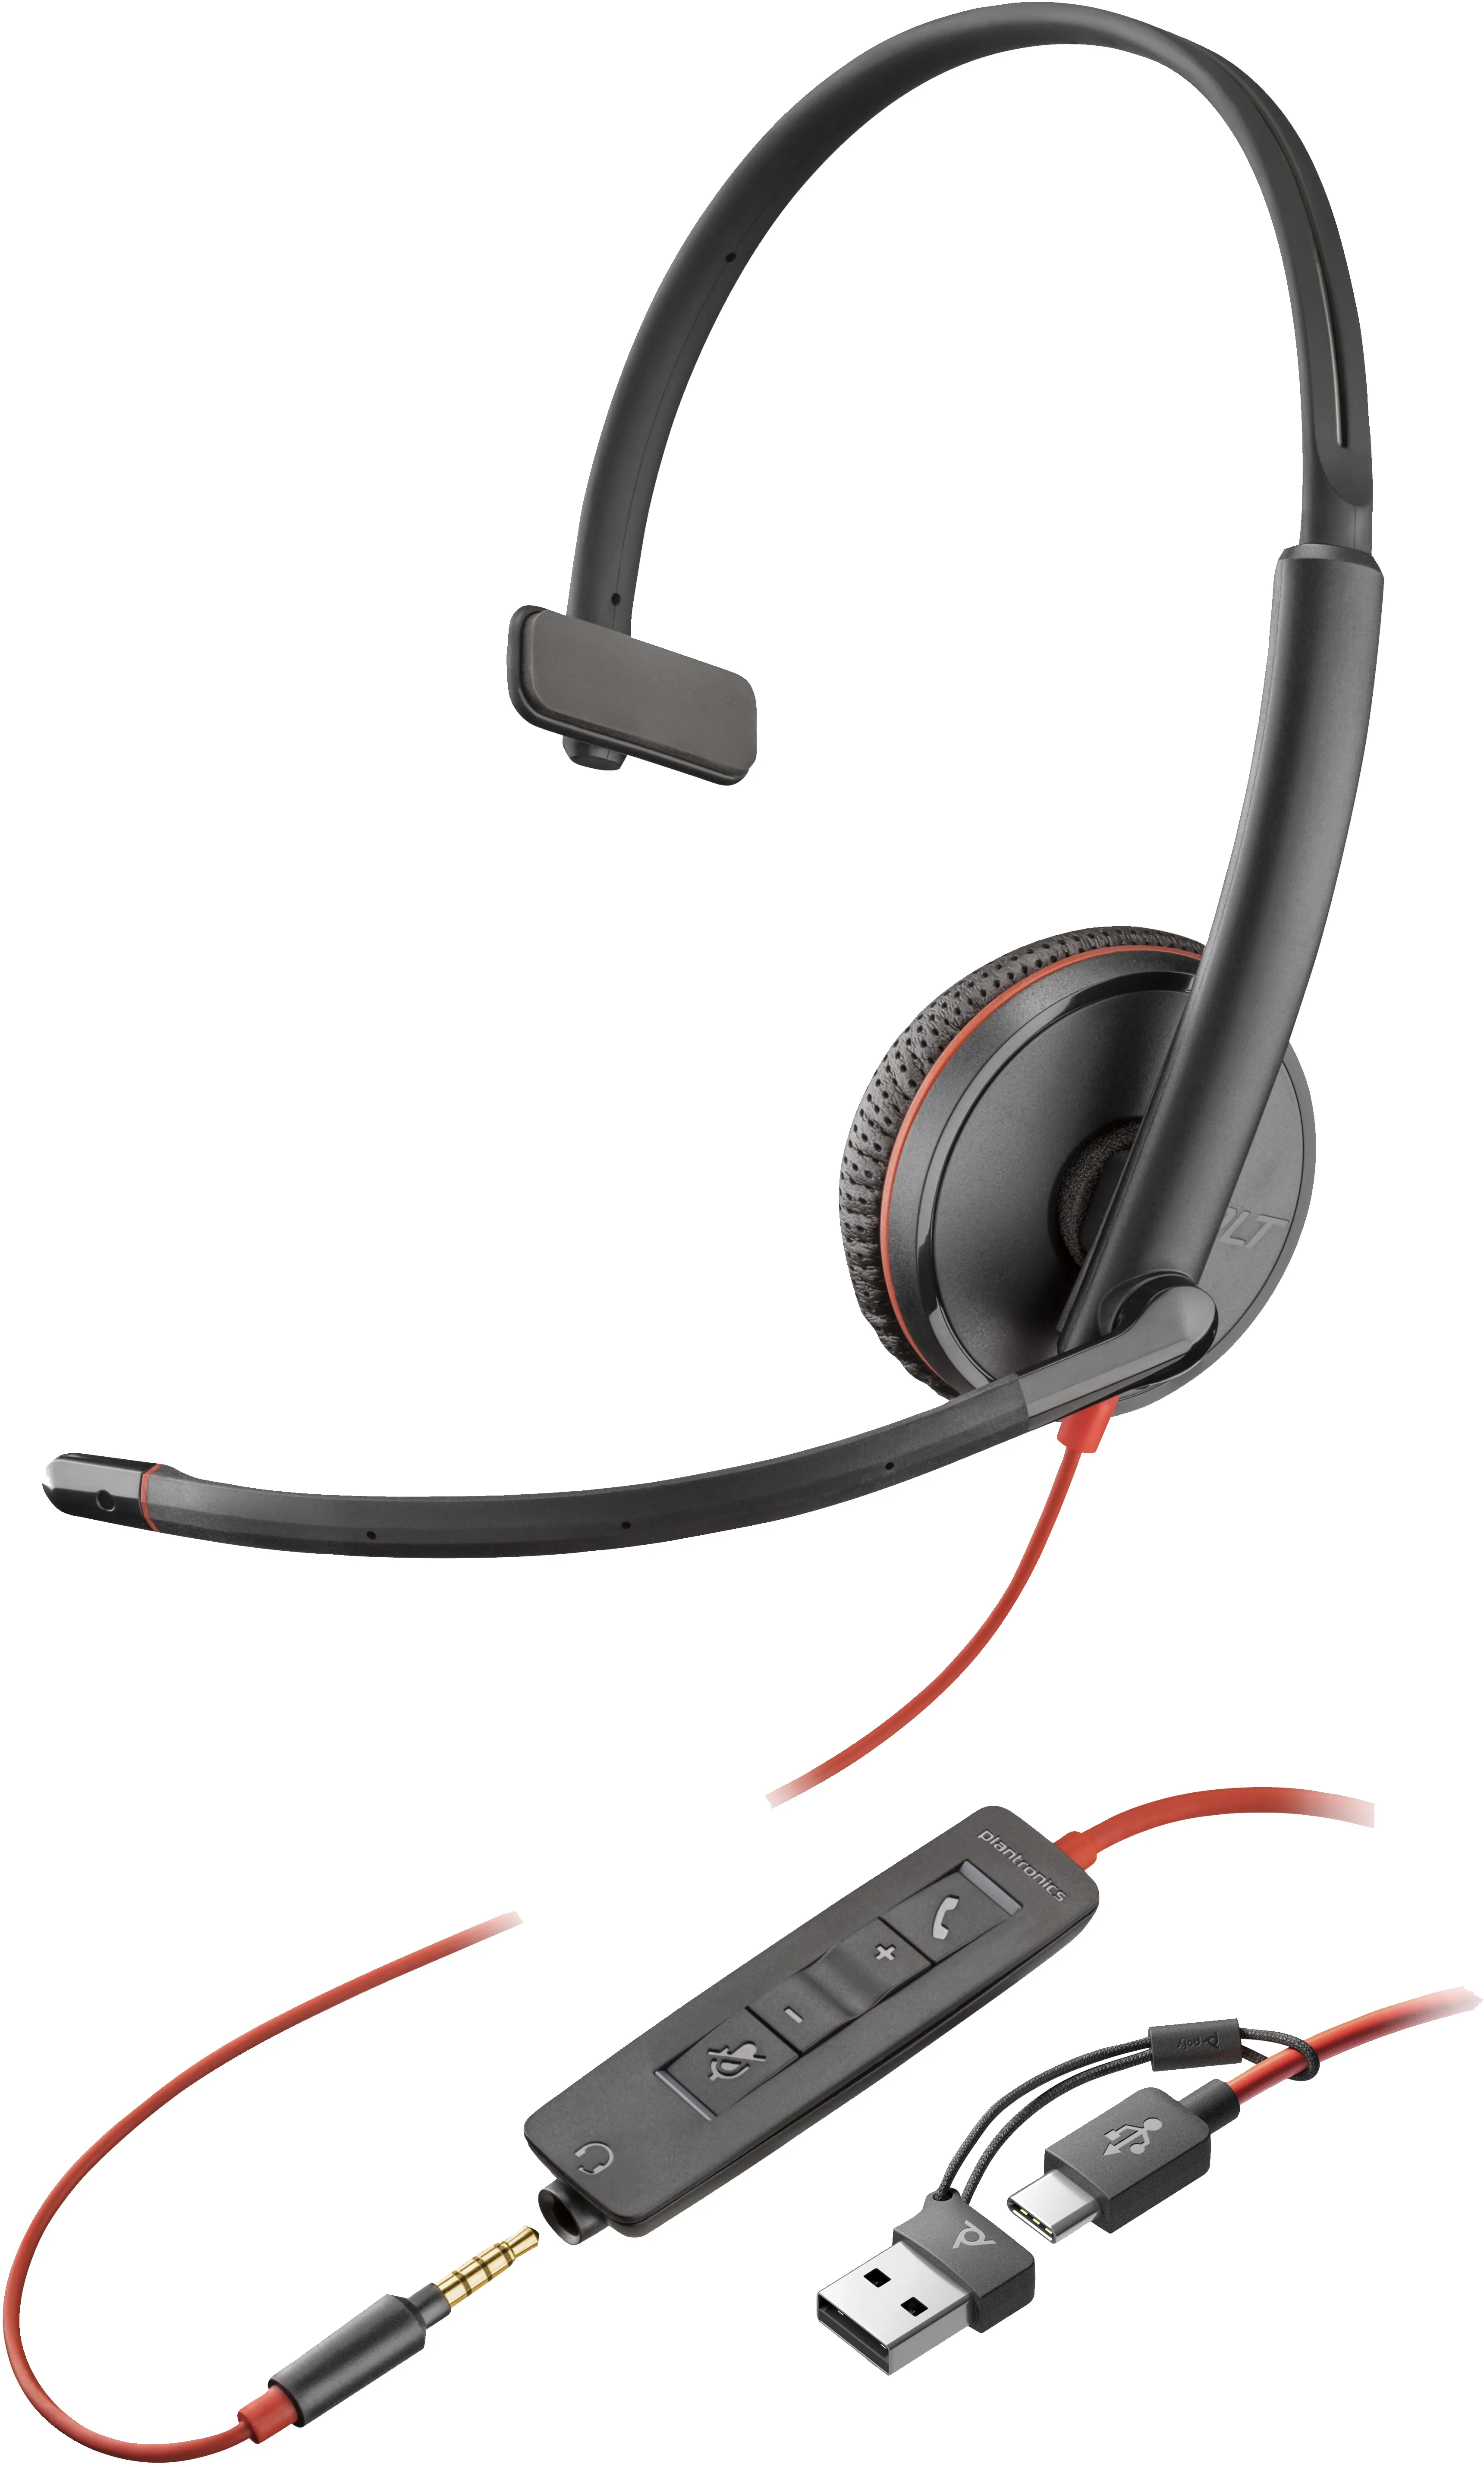 Achat Casque Micro HP Poly Blackwire 3215 Monaural USB-C Headset +3.5mm